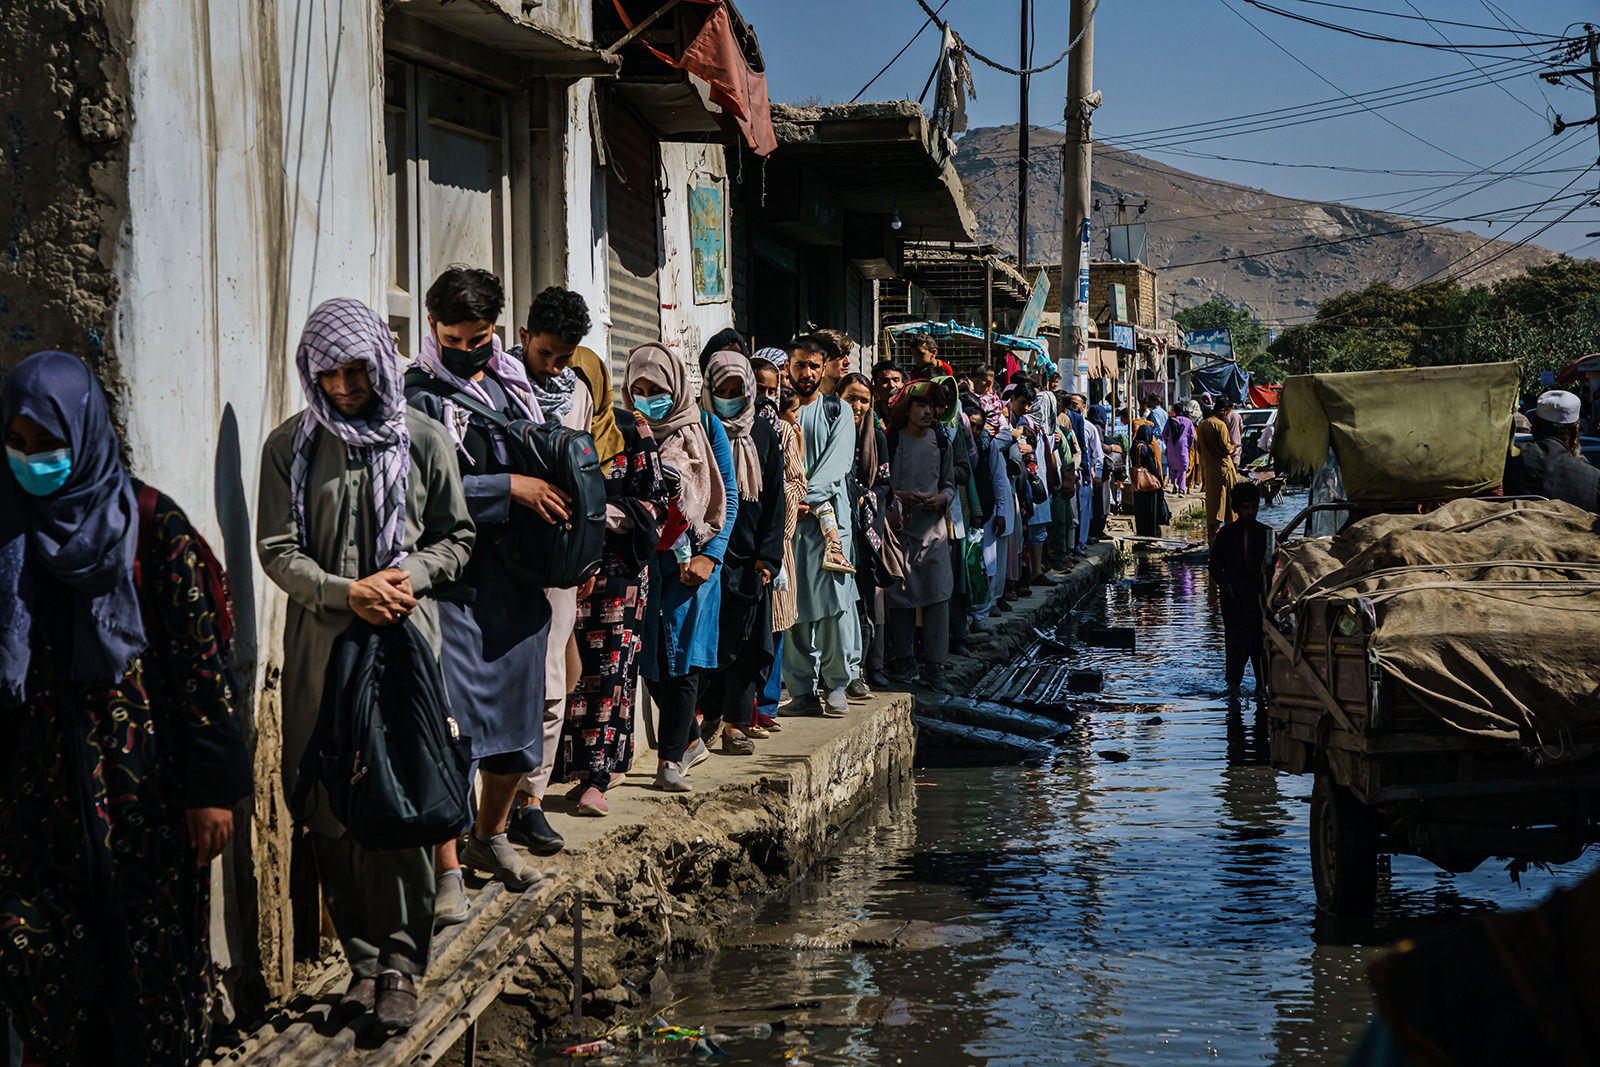 Afghans make their way through a flooded street towards a nearby airport entrance to try their chance at evacuating out of the country, in Kabul, Afghanistan on Wednesday, August 25. 